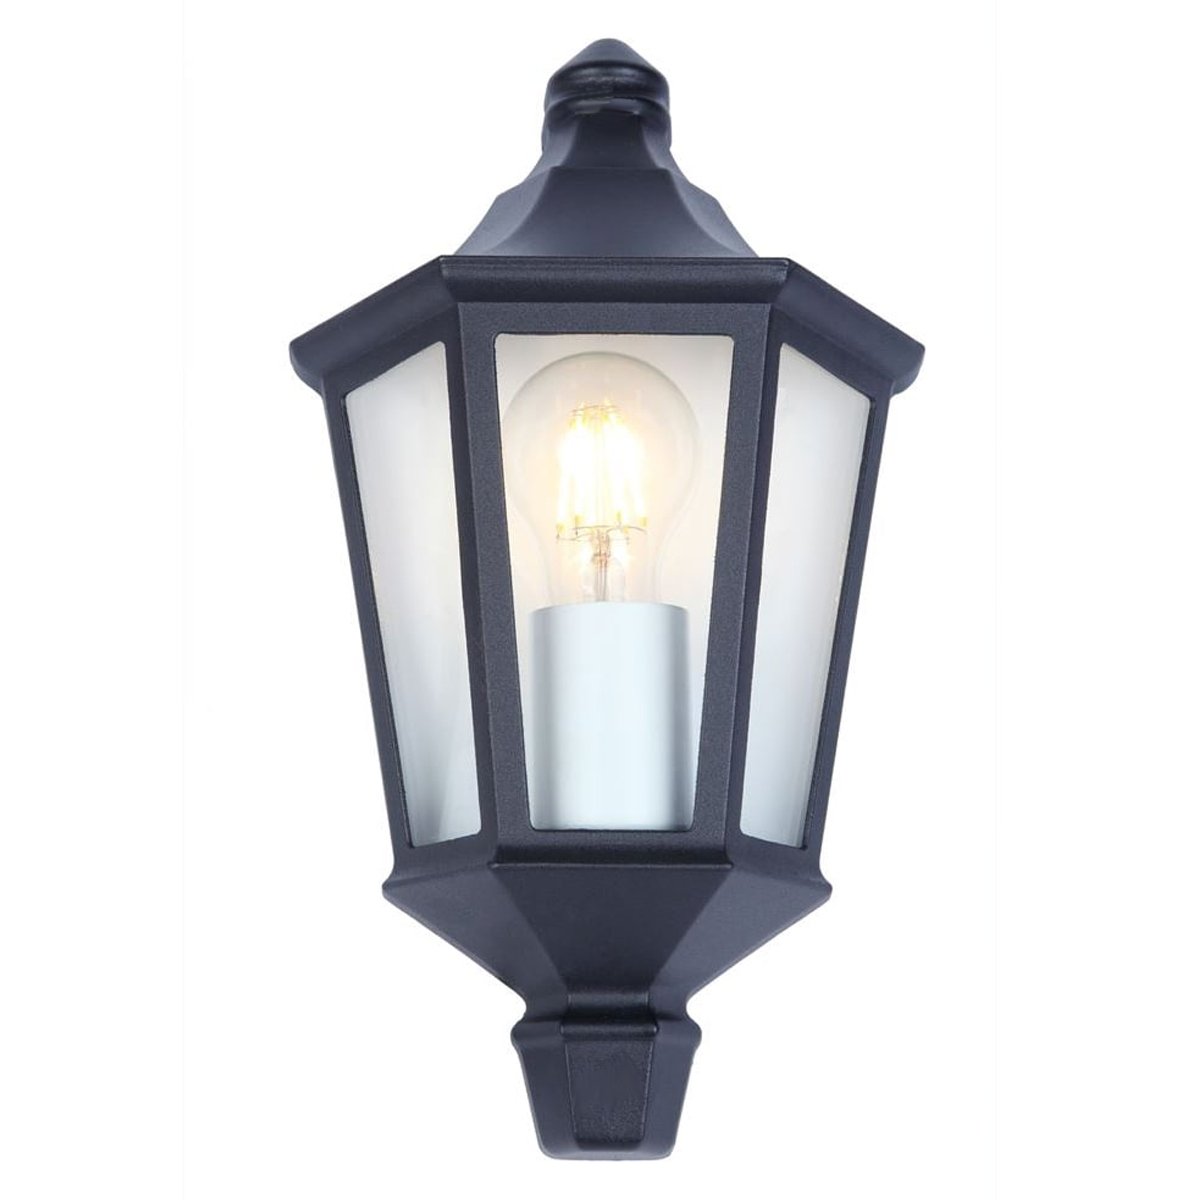 If you’re looking for a modern take on a traditional outdoor wall light, this glass half lantern flush wall light is perfect for adding style and protection for your home.   This product also contains an imposing black matt finish, making it ideal for any home design - adding a statement to any wall it fits in. Create an inviting glow over your garden and home with our Tyra glass coach lantern wall light by CGC Interiors.